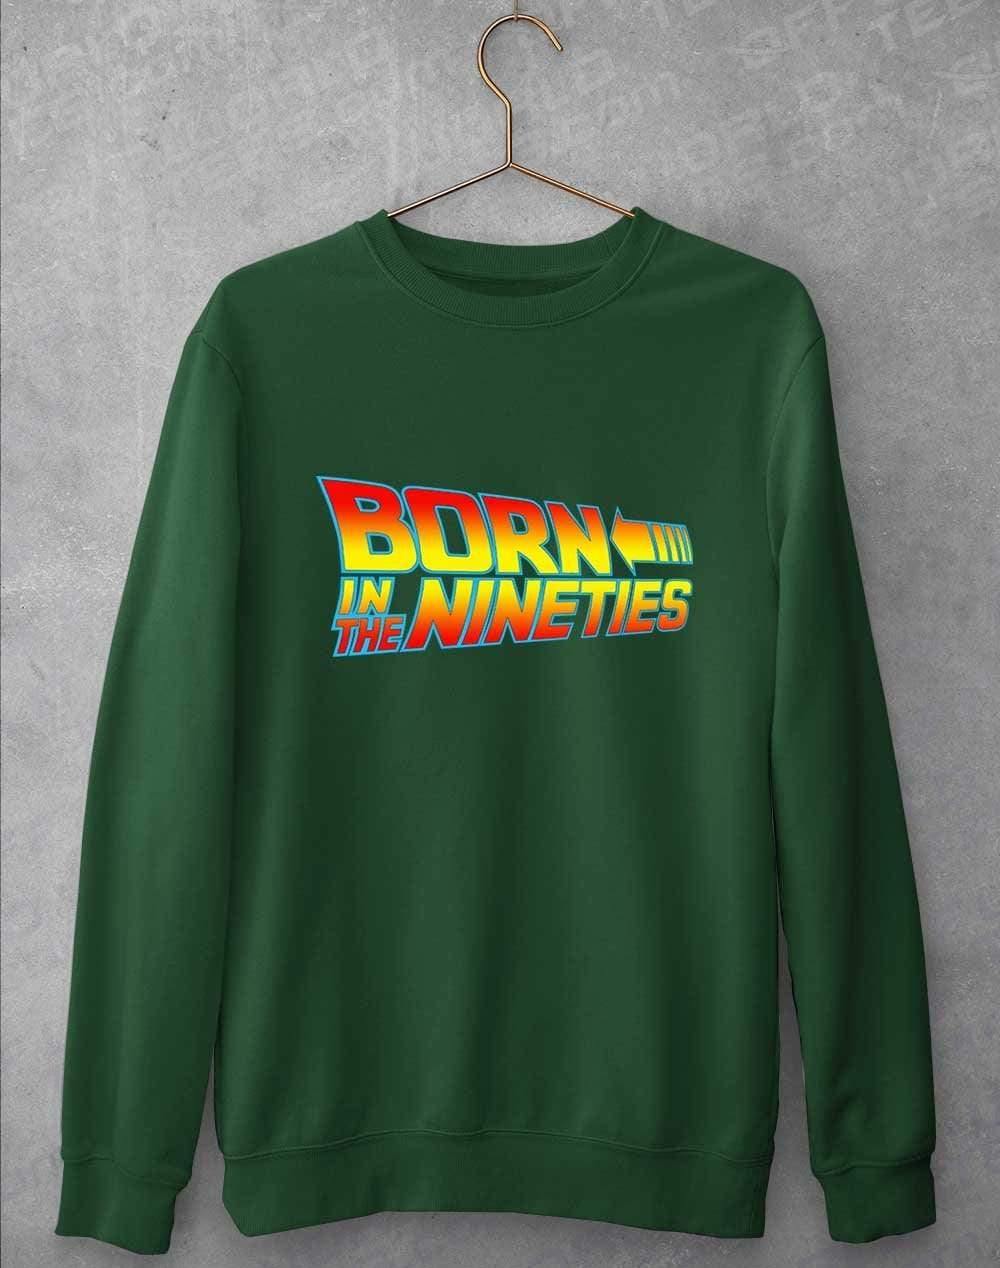 Born in the... (CHOOSE YOUR DECADE!) Sweatshirt 1990s - Bottle Green / S  - Off World Tees